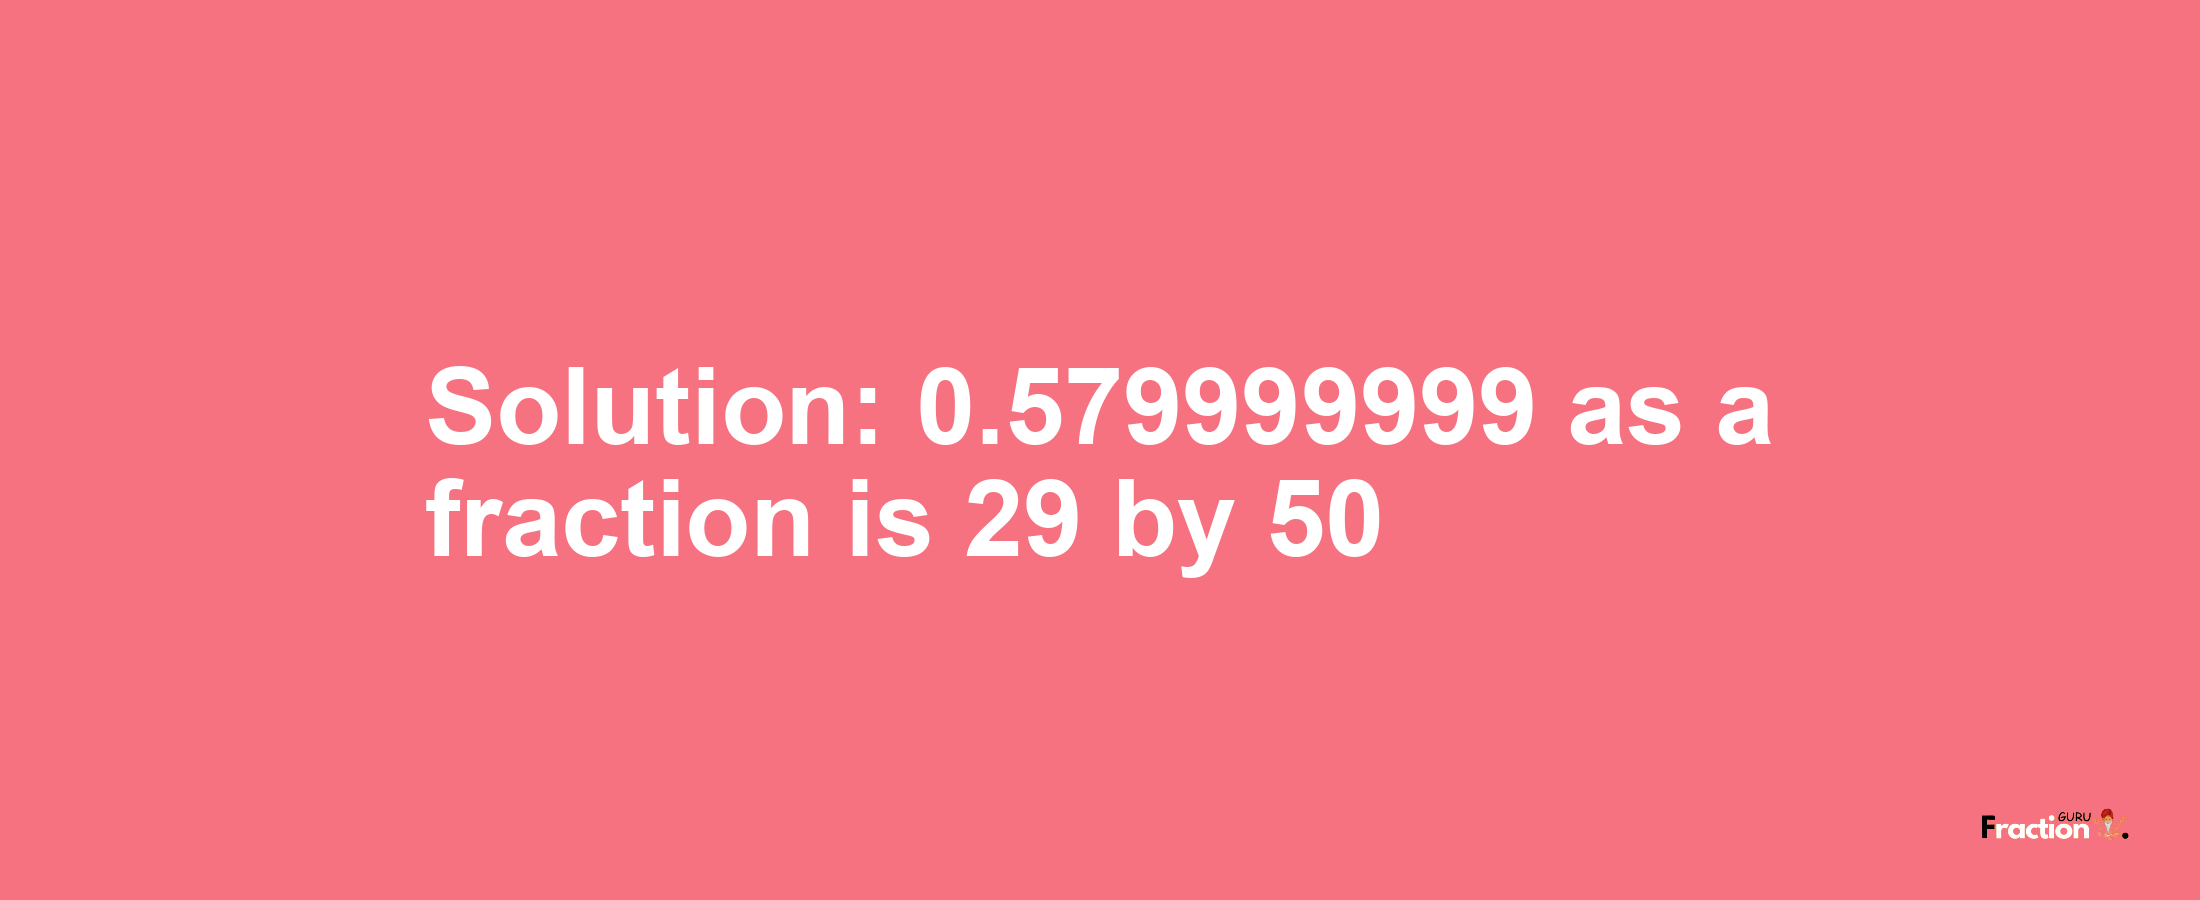 Solution:0.579999999 as a fraction is 29/50